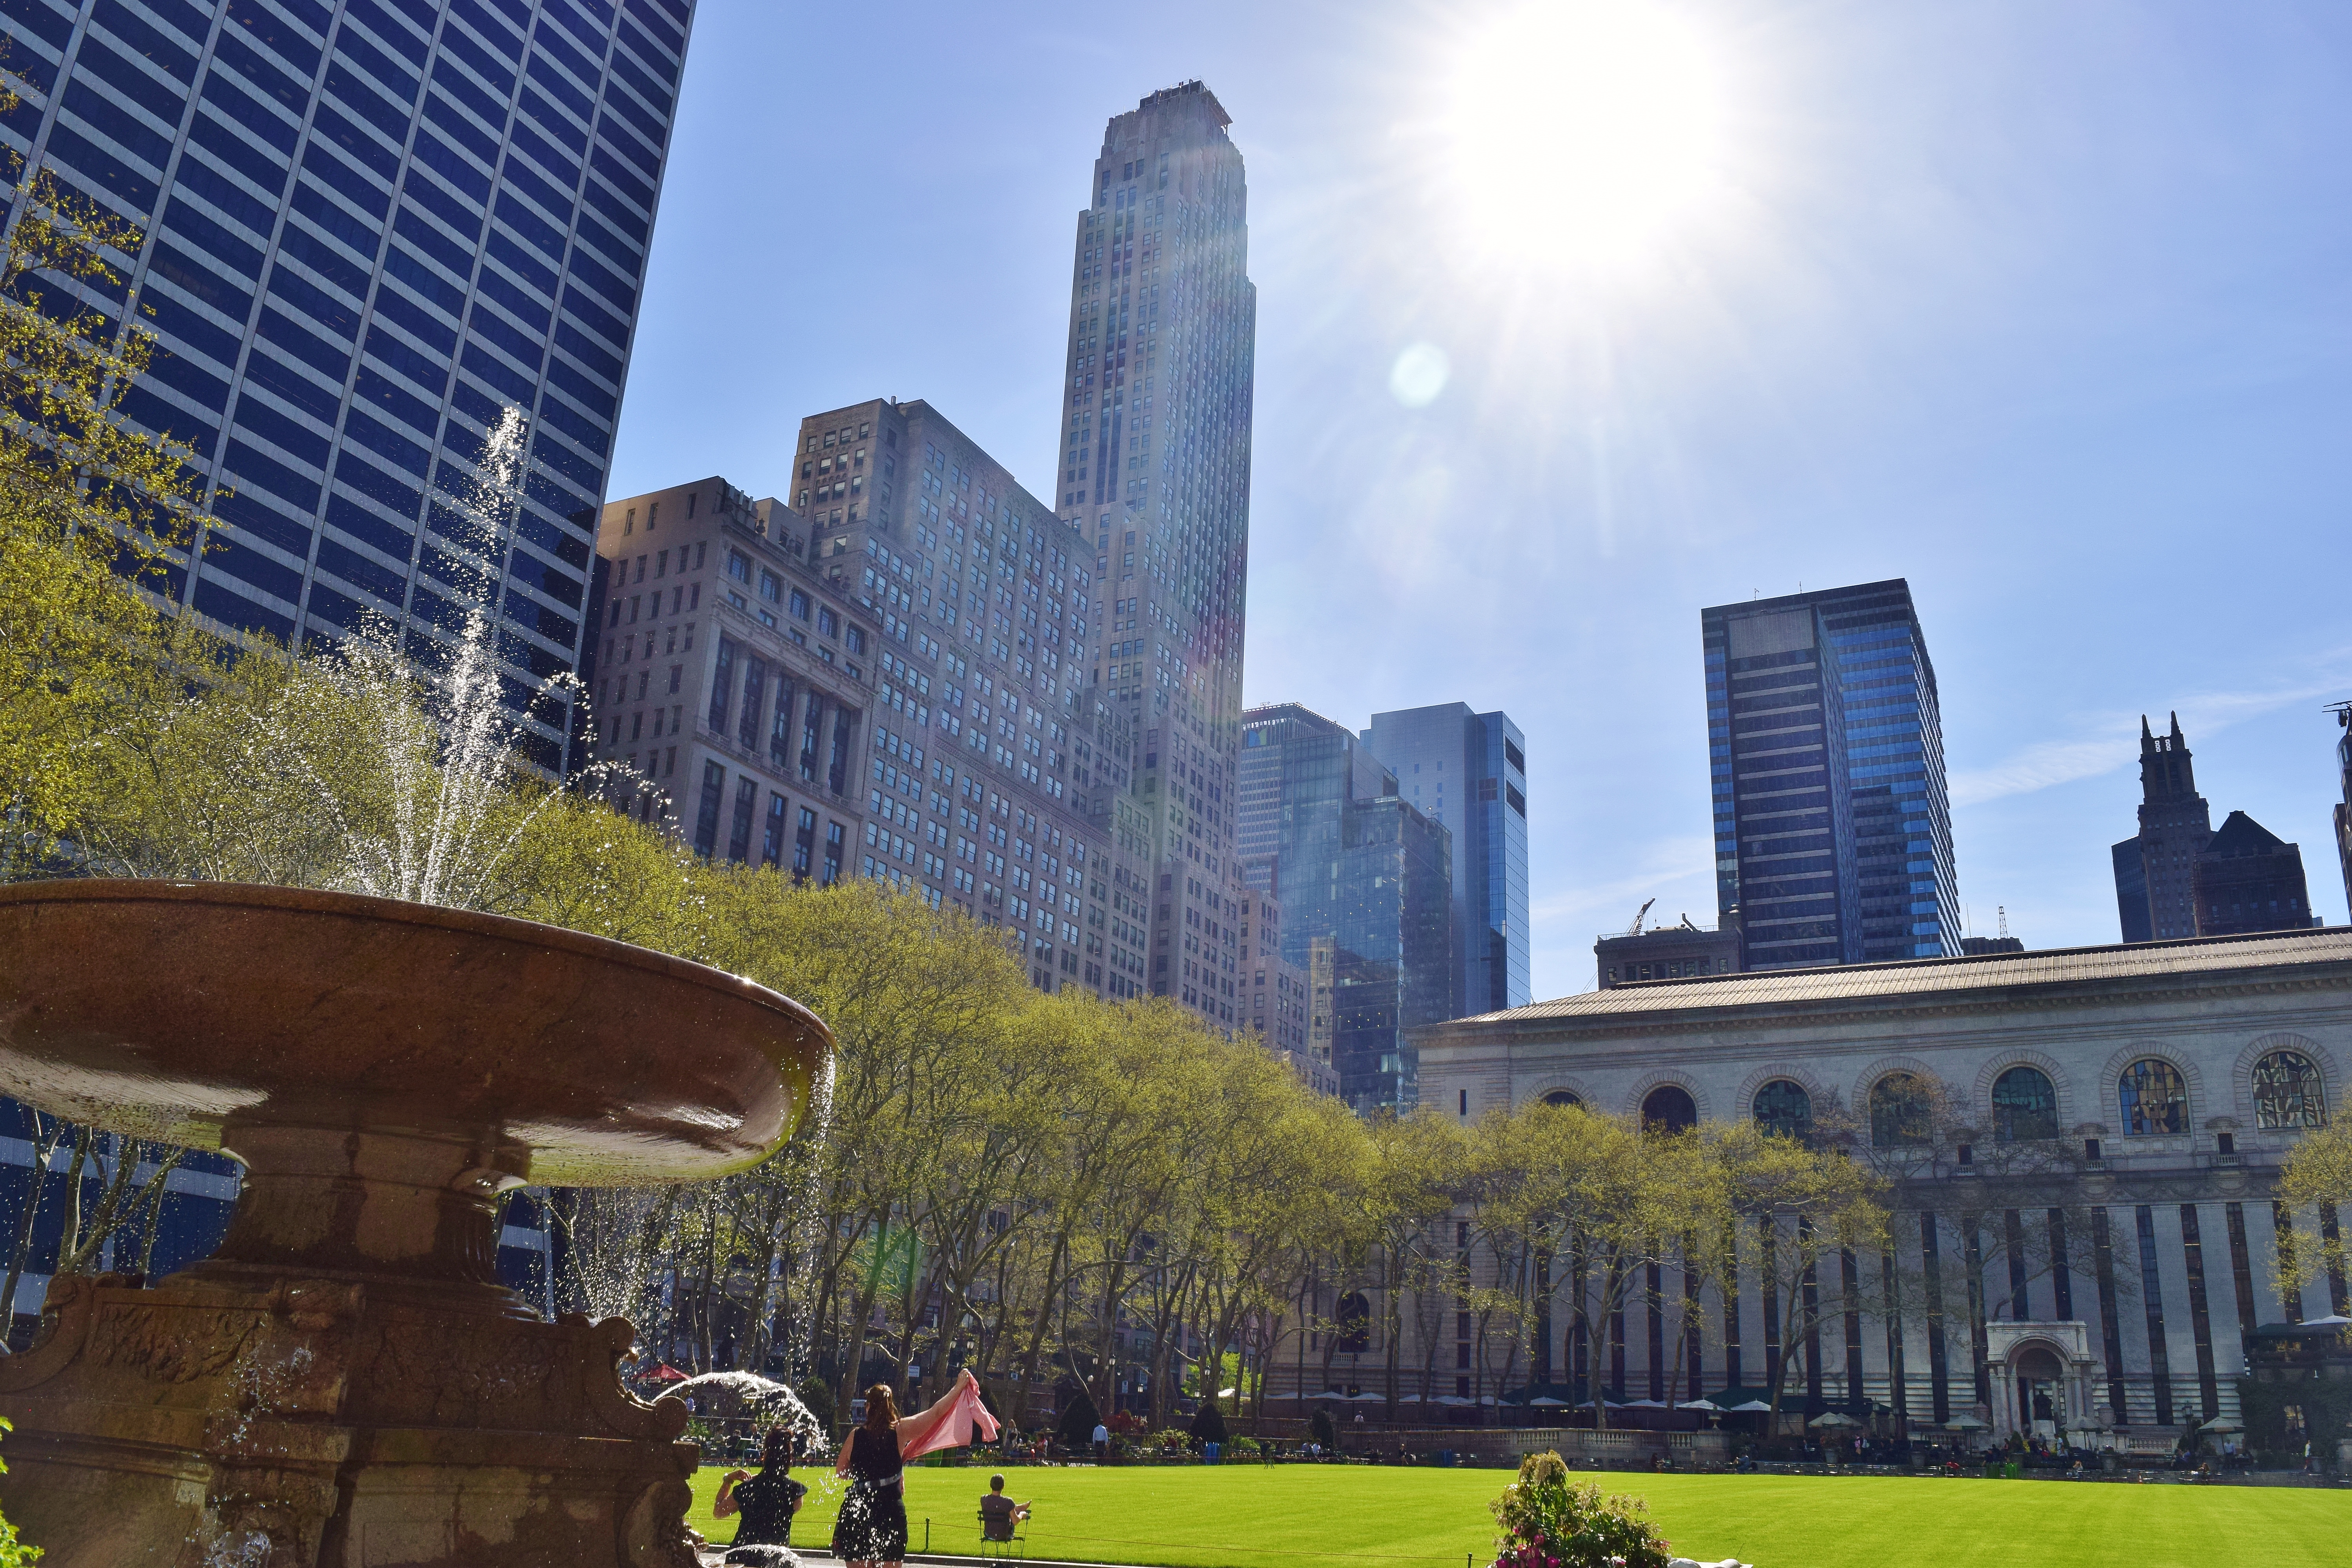 A shot of Bryant Park on a sunny day.